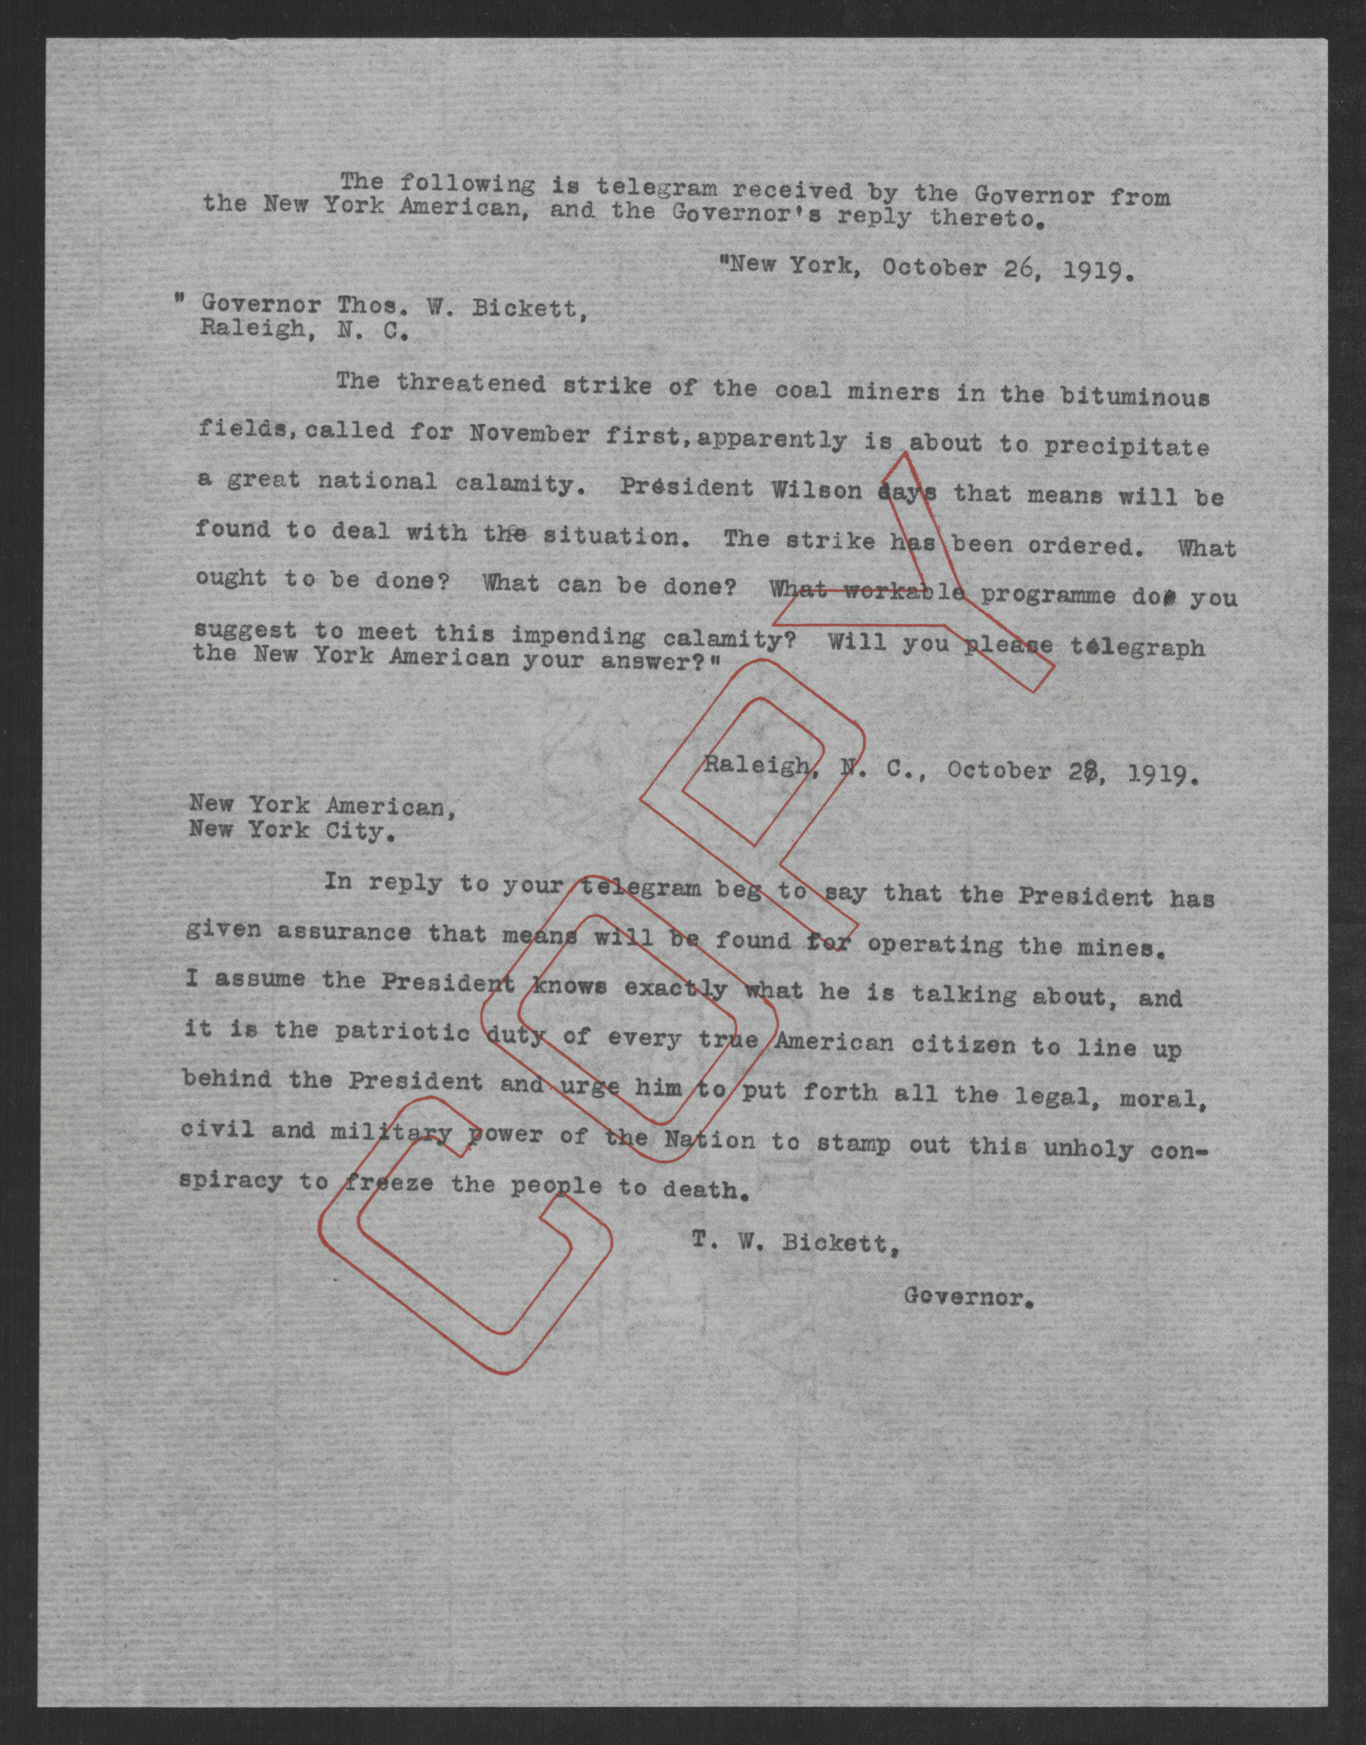 Telegrams between Thomas W. Bickett and the New York American, October 26-28, 1919